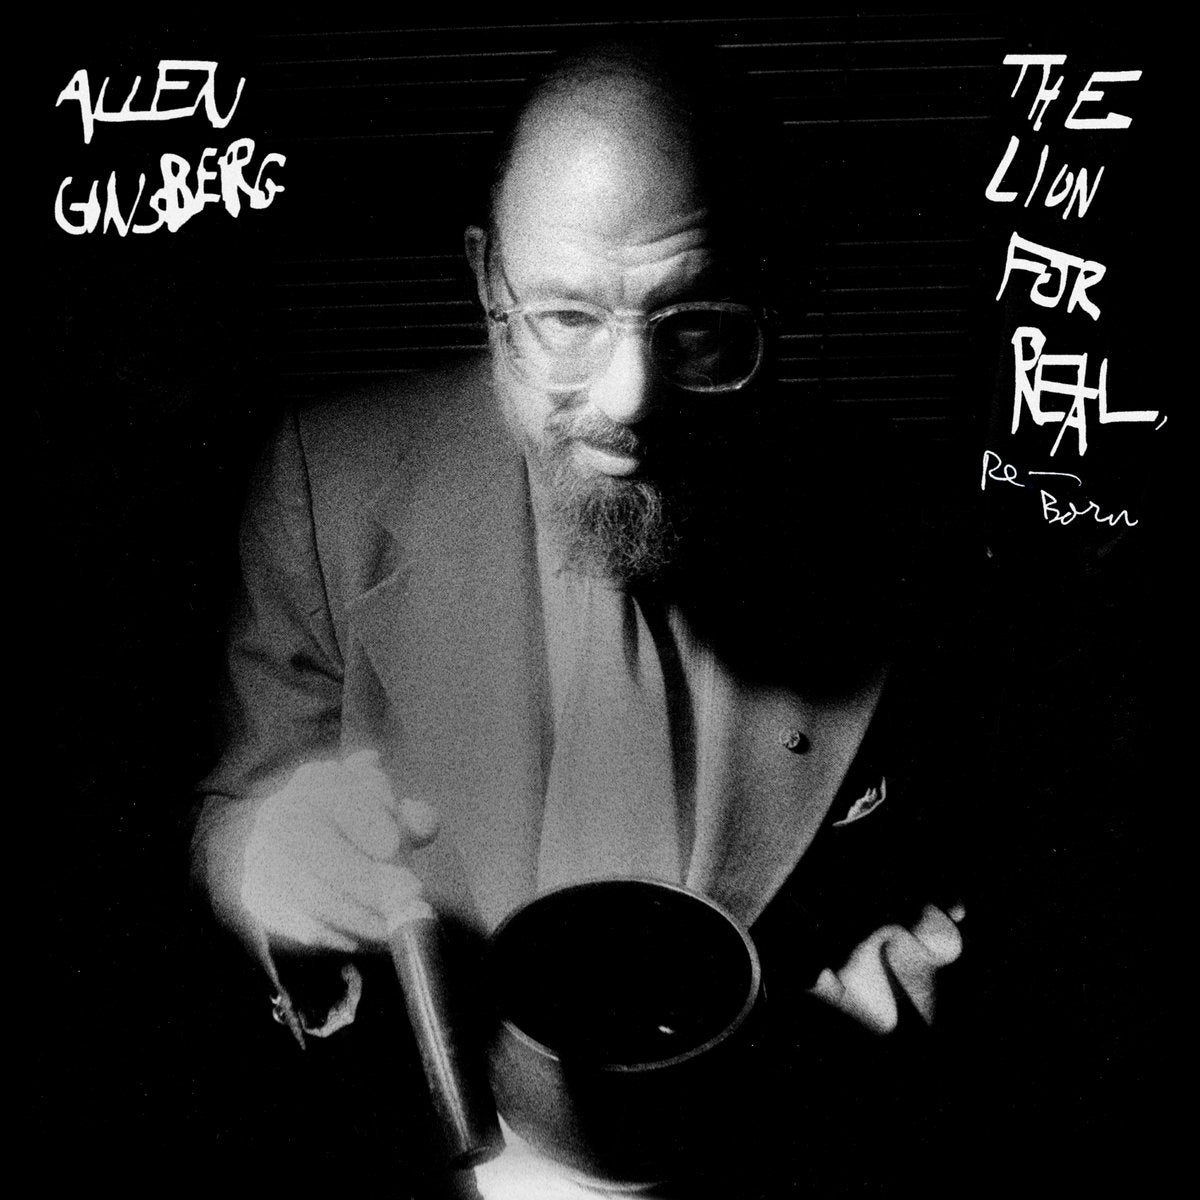 Allen Ginsberg - The Lion for Real, Re-Born 2LP